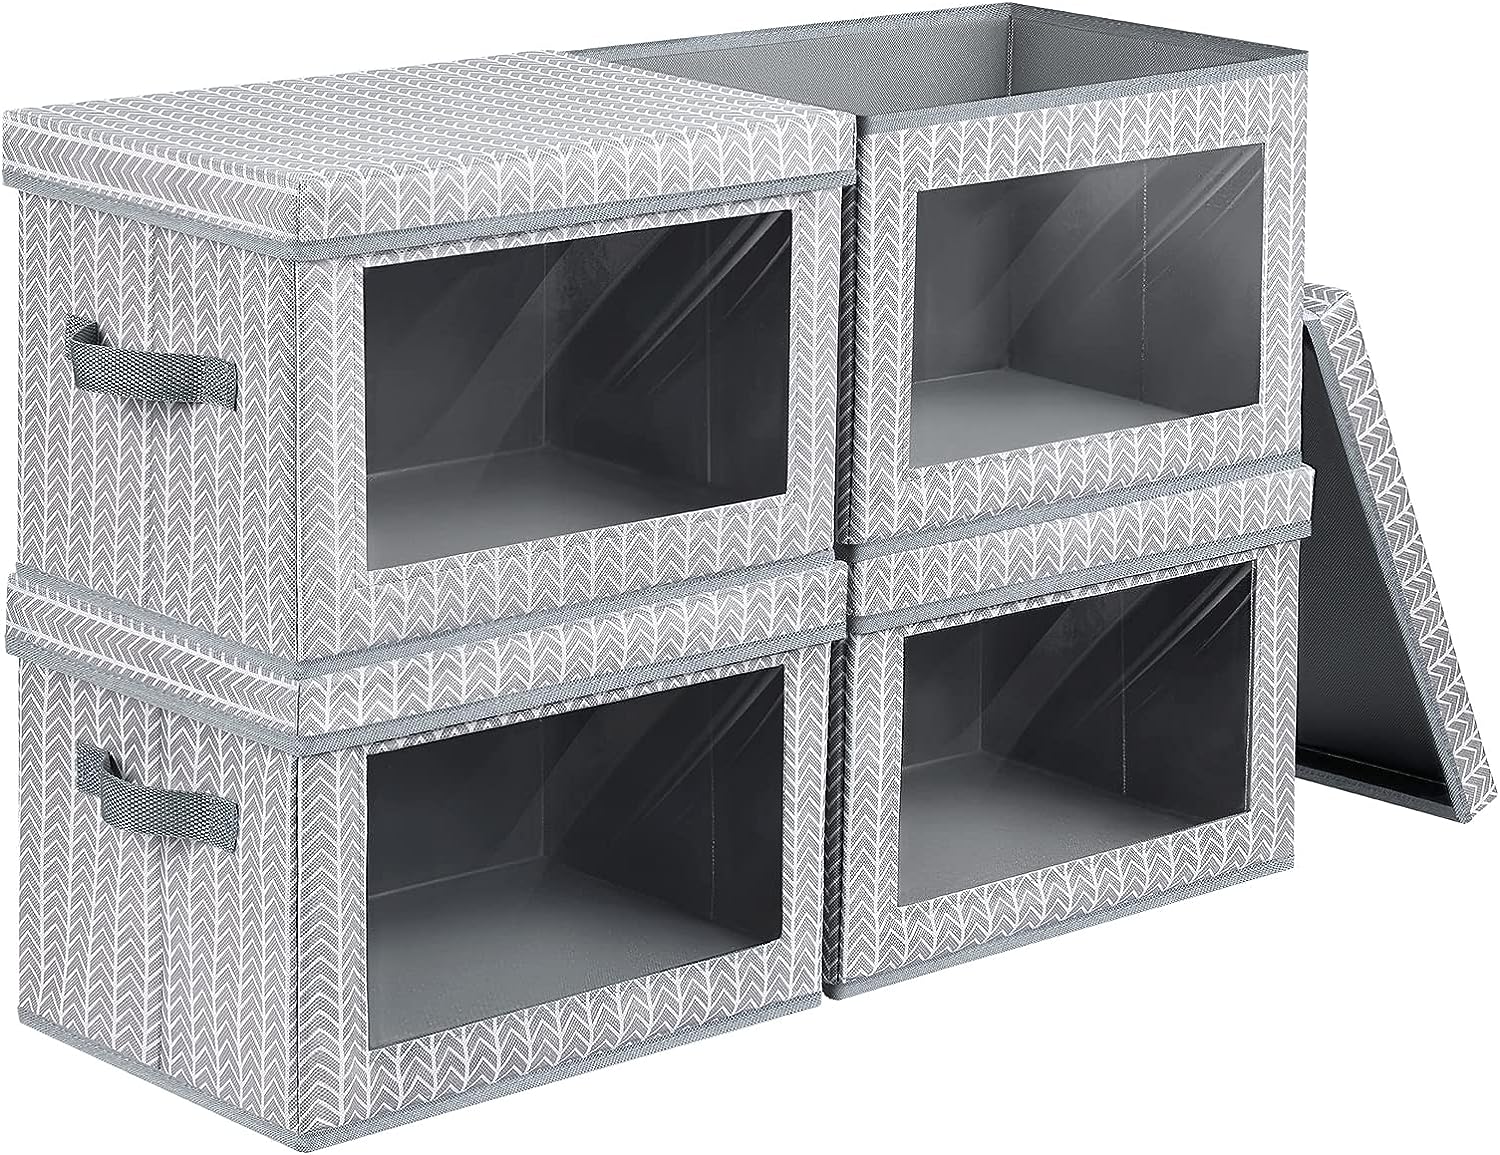 Blushbees® 4-Pack Storage Bins with Handles and Lids - Light Grey